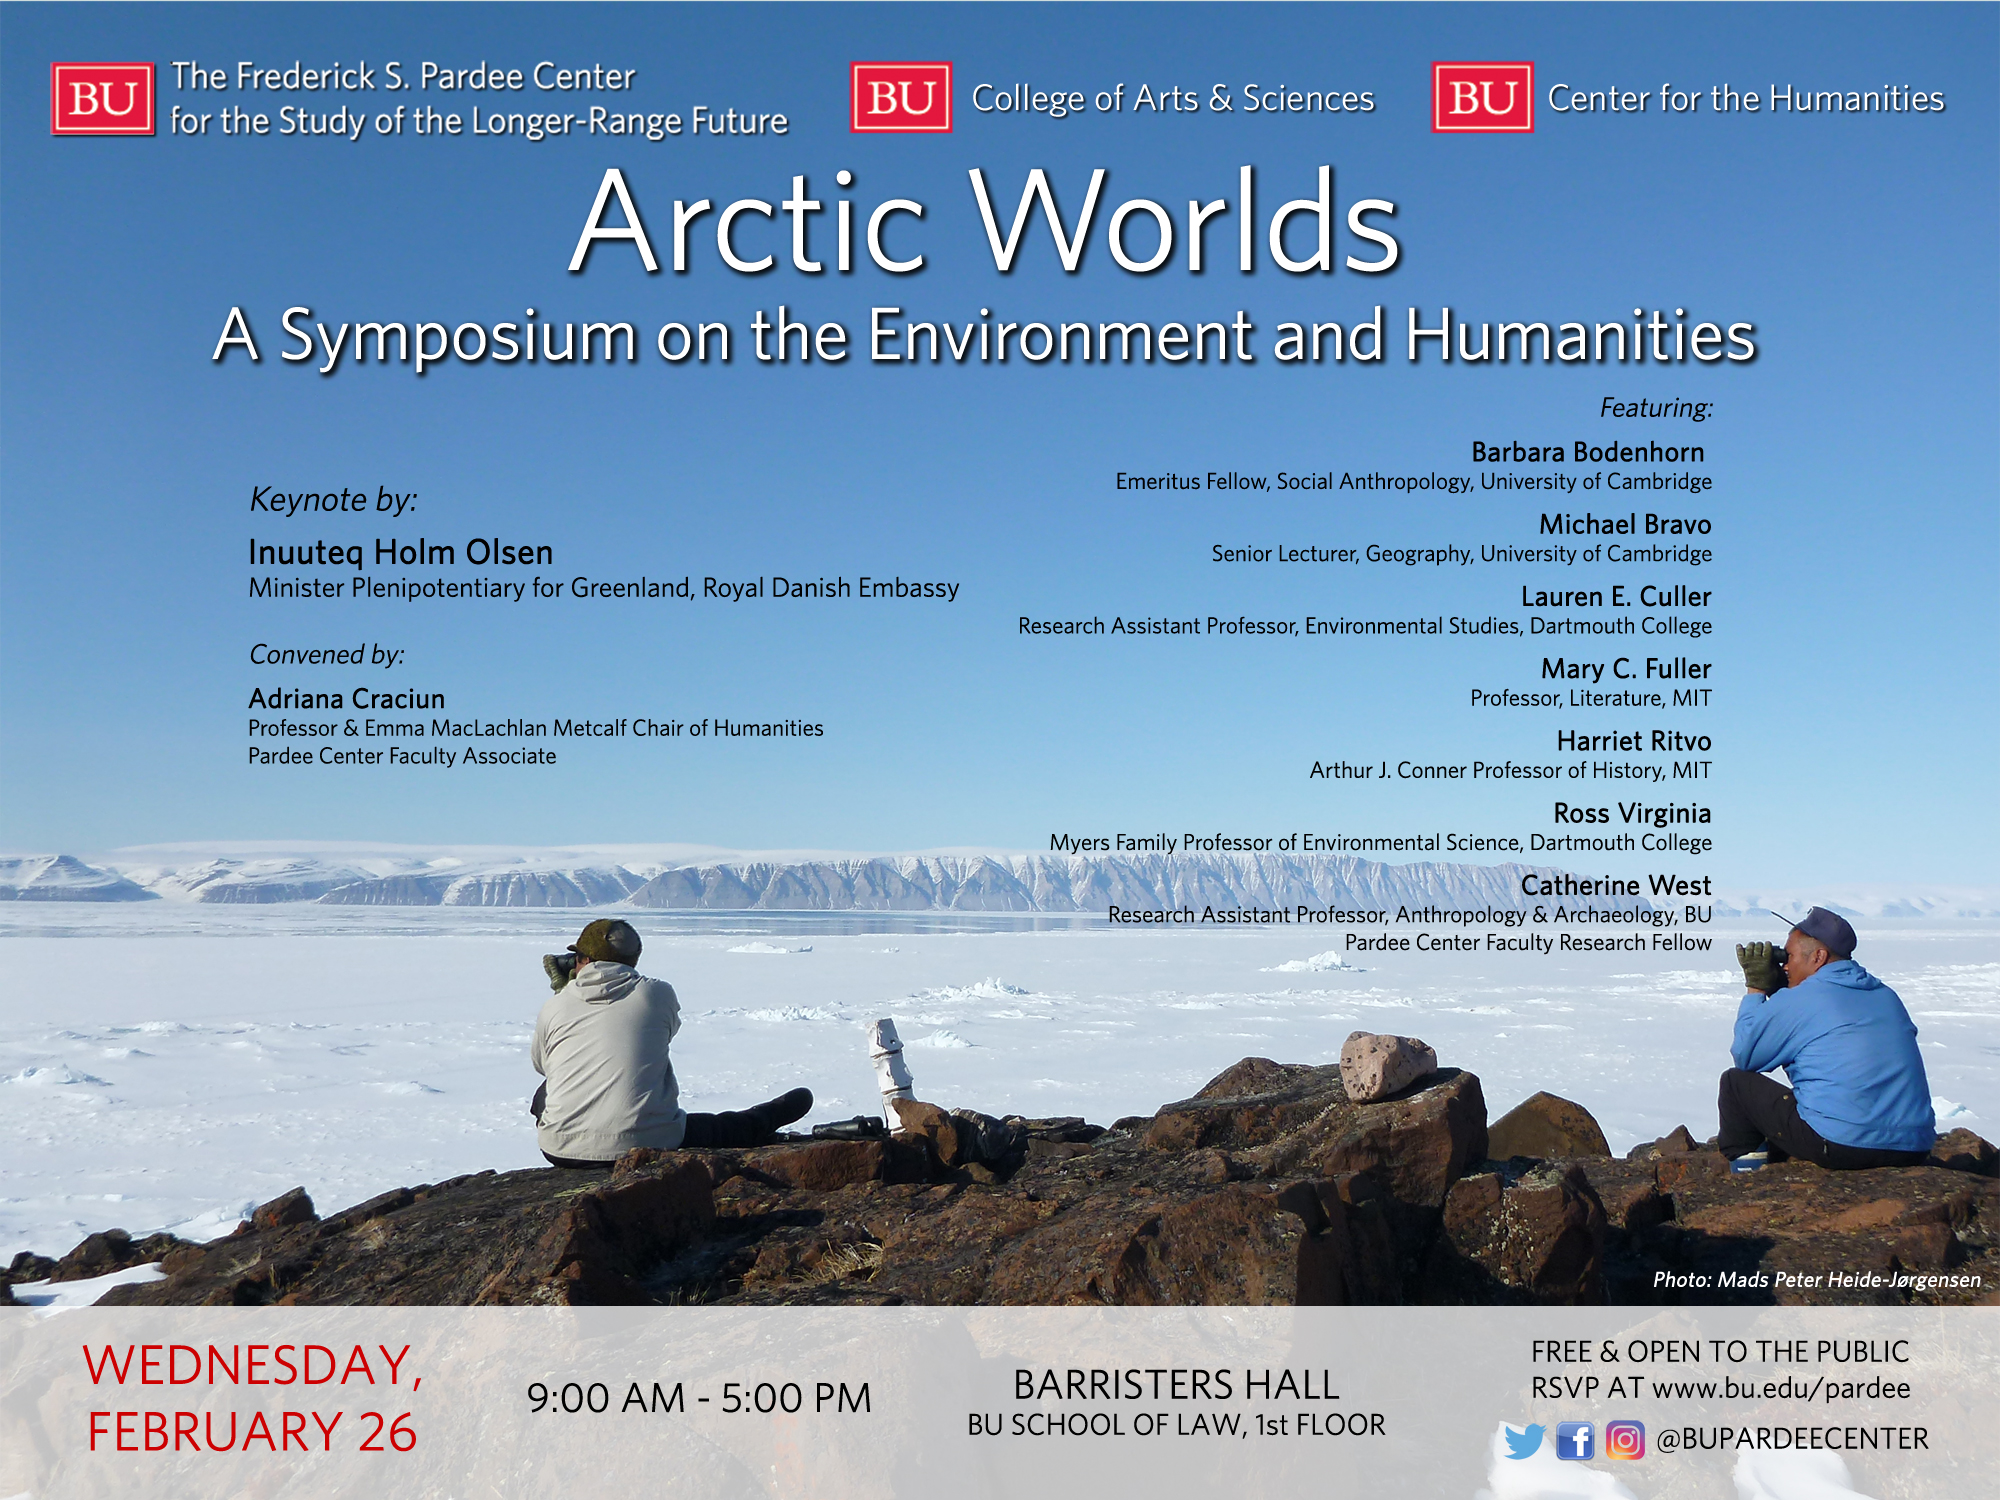 MIT's Professor Fuller to present @ 2/26 Arctic Worlds BU Conference